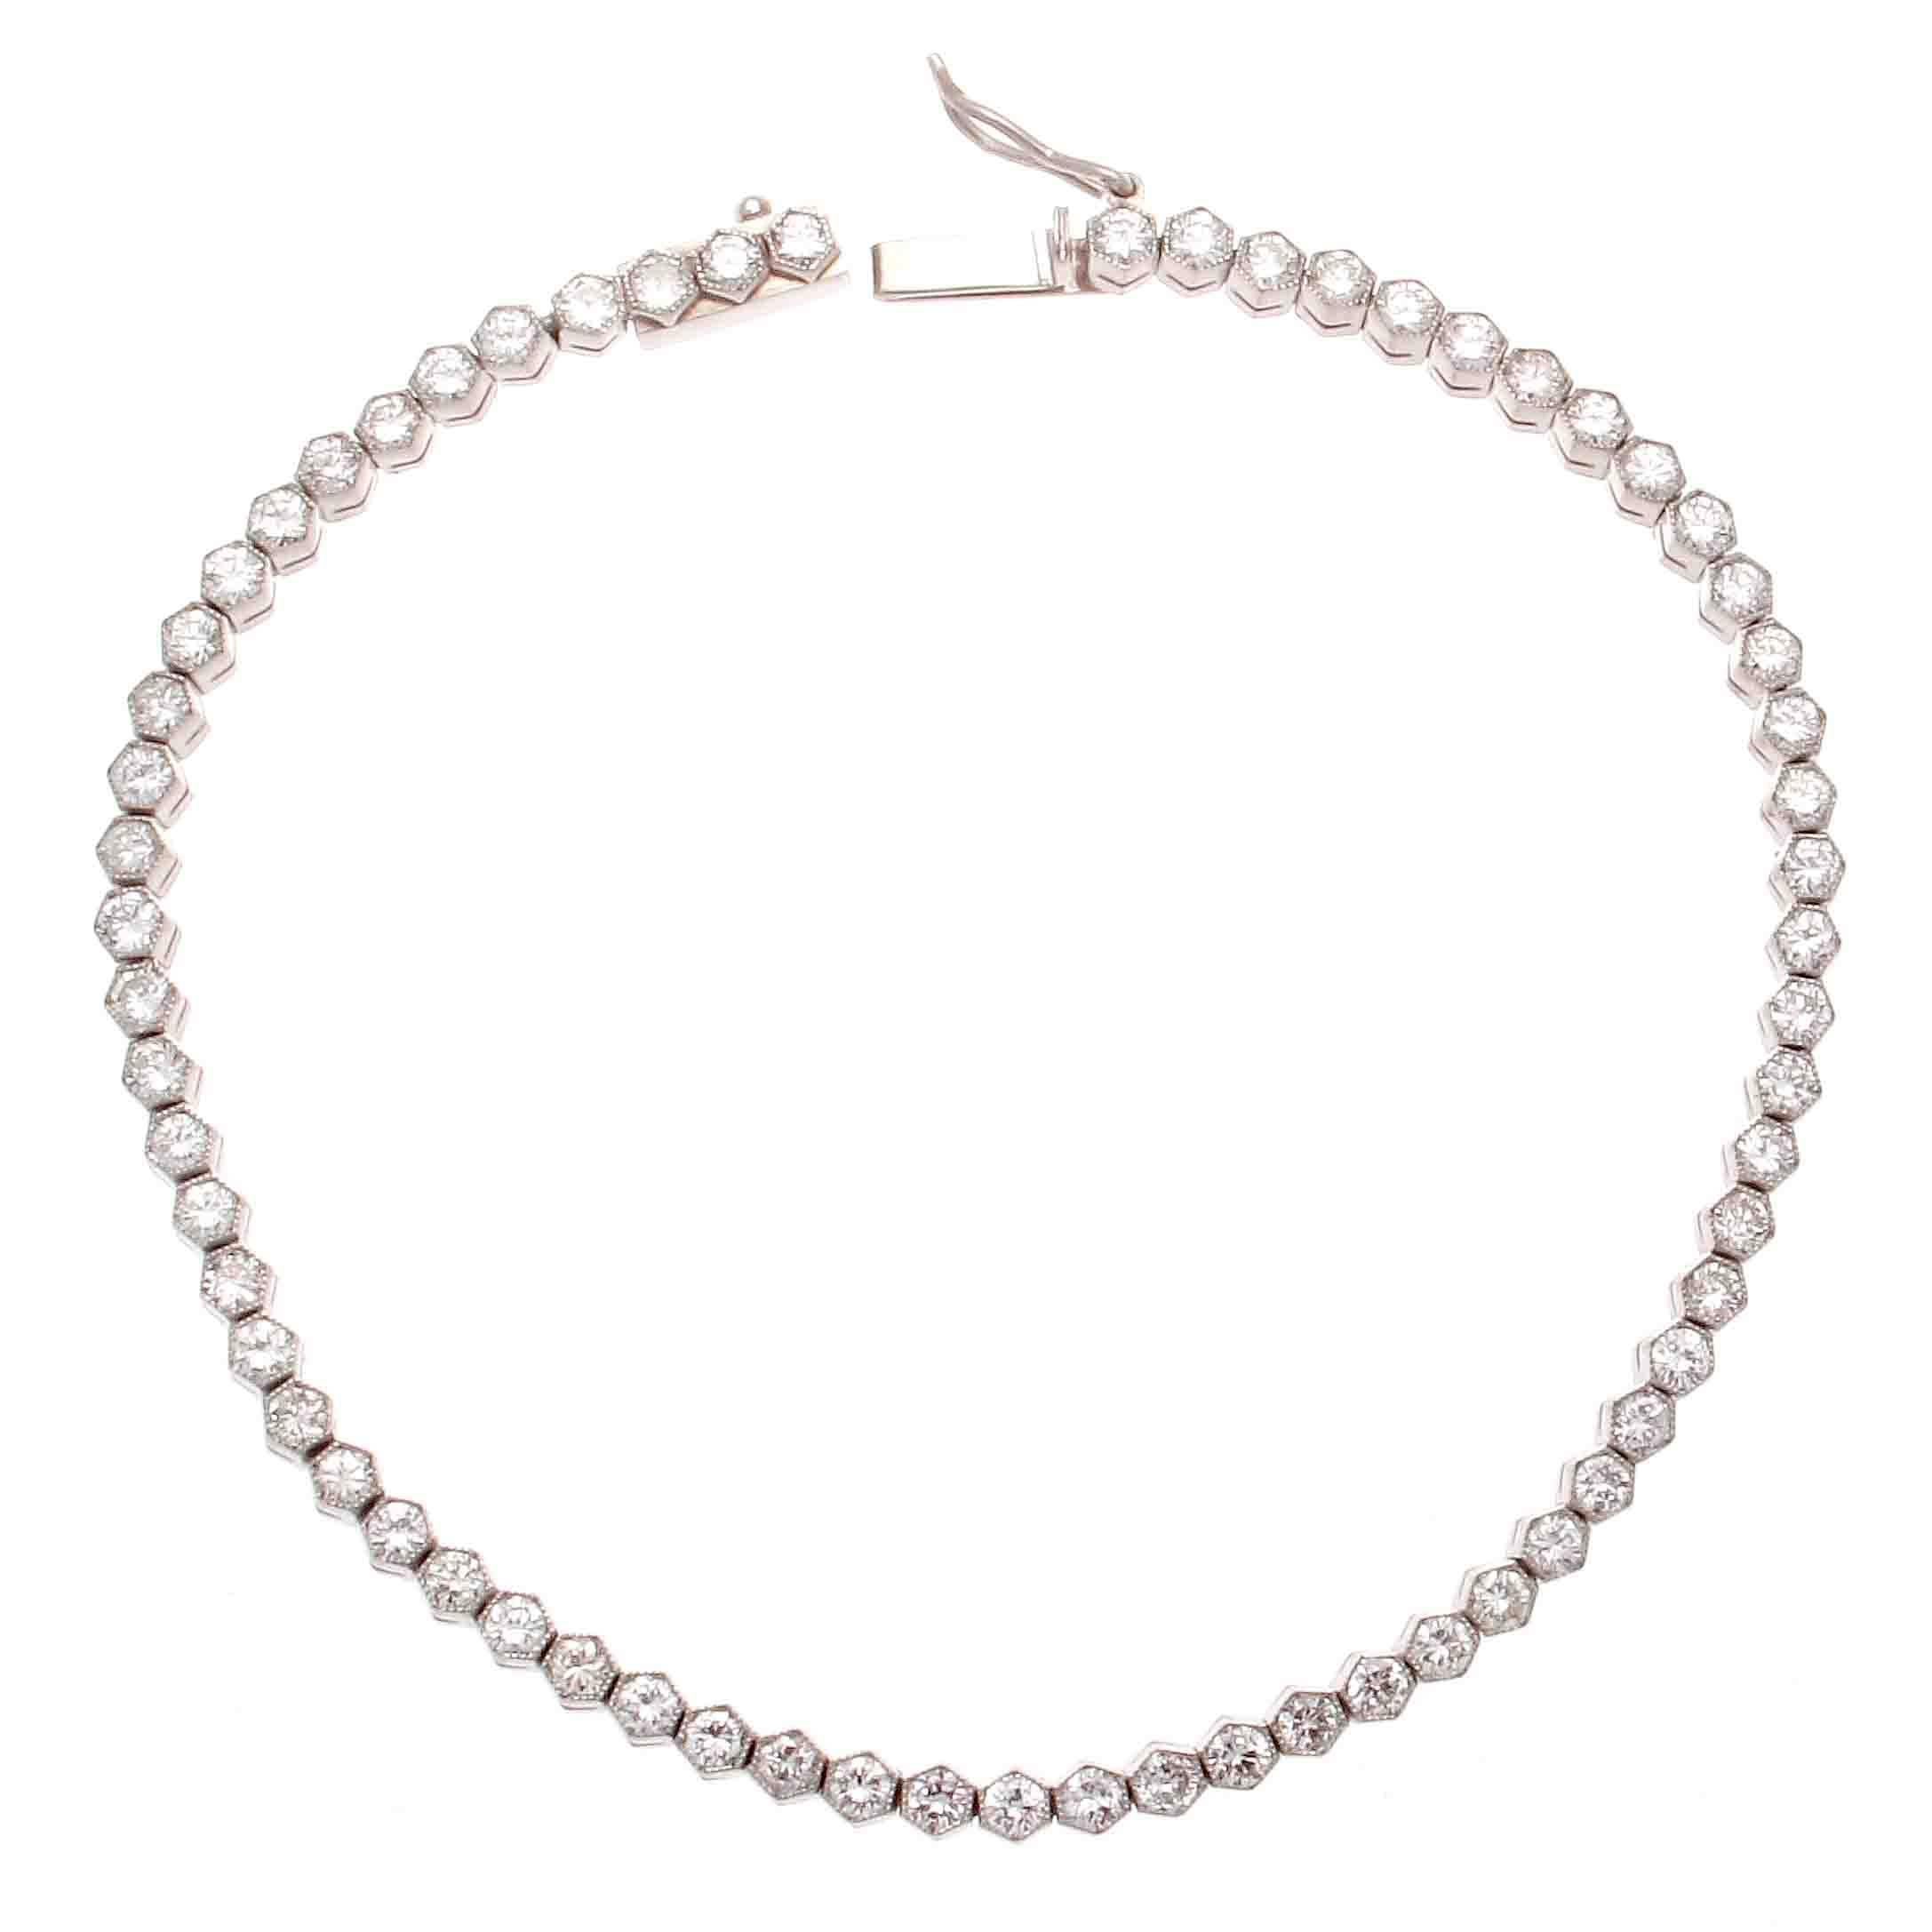 A tennis bracelet designed with numerous perfectly matching round brilliant cut diamonds each set in their own expertly crafted hexagon housing weighing a total of 2.70 carats that are F-G color, VS clarity. Hand crafted in platinum. 